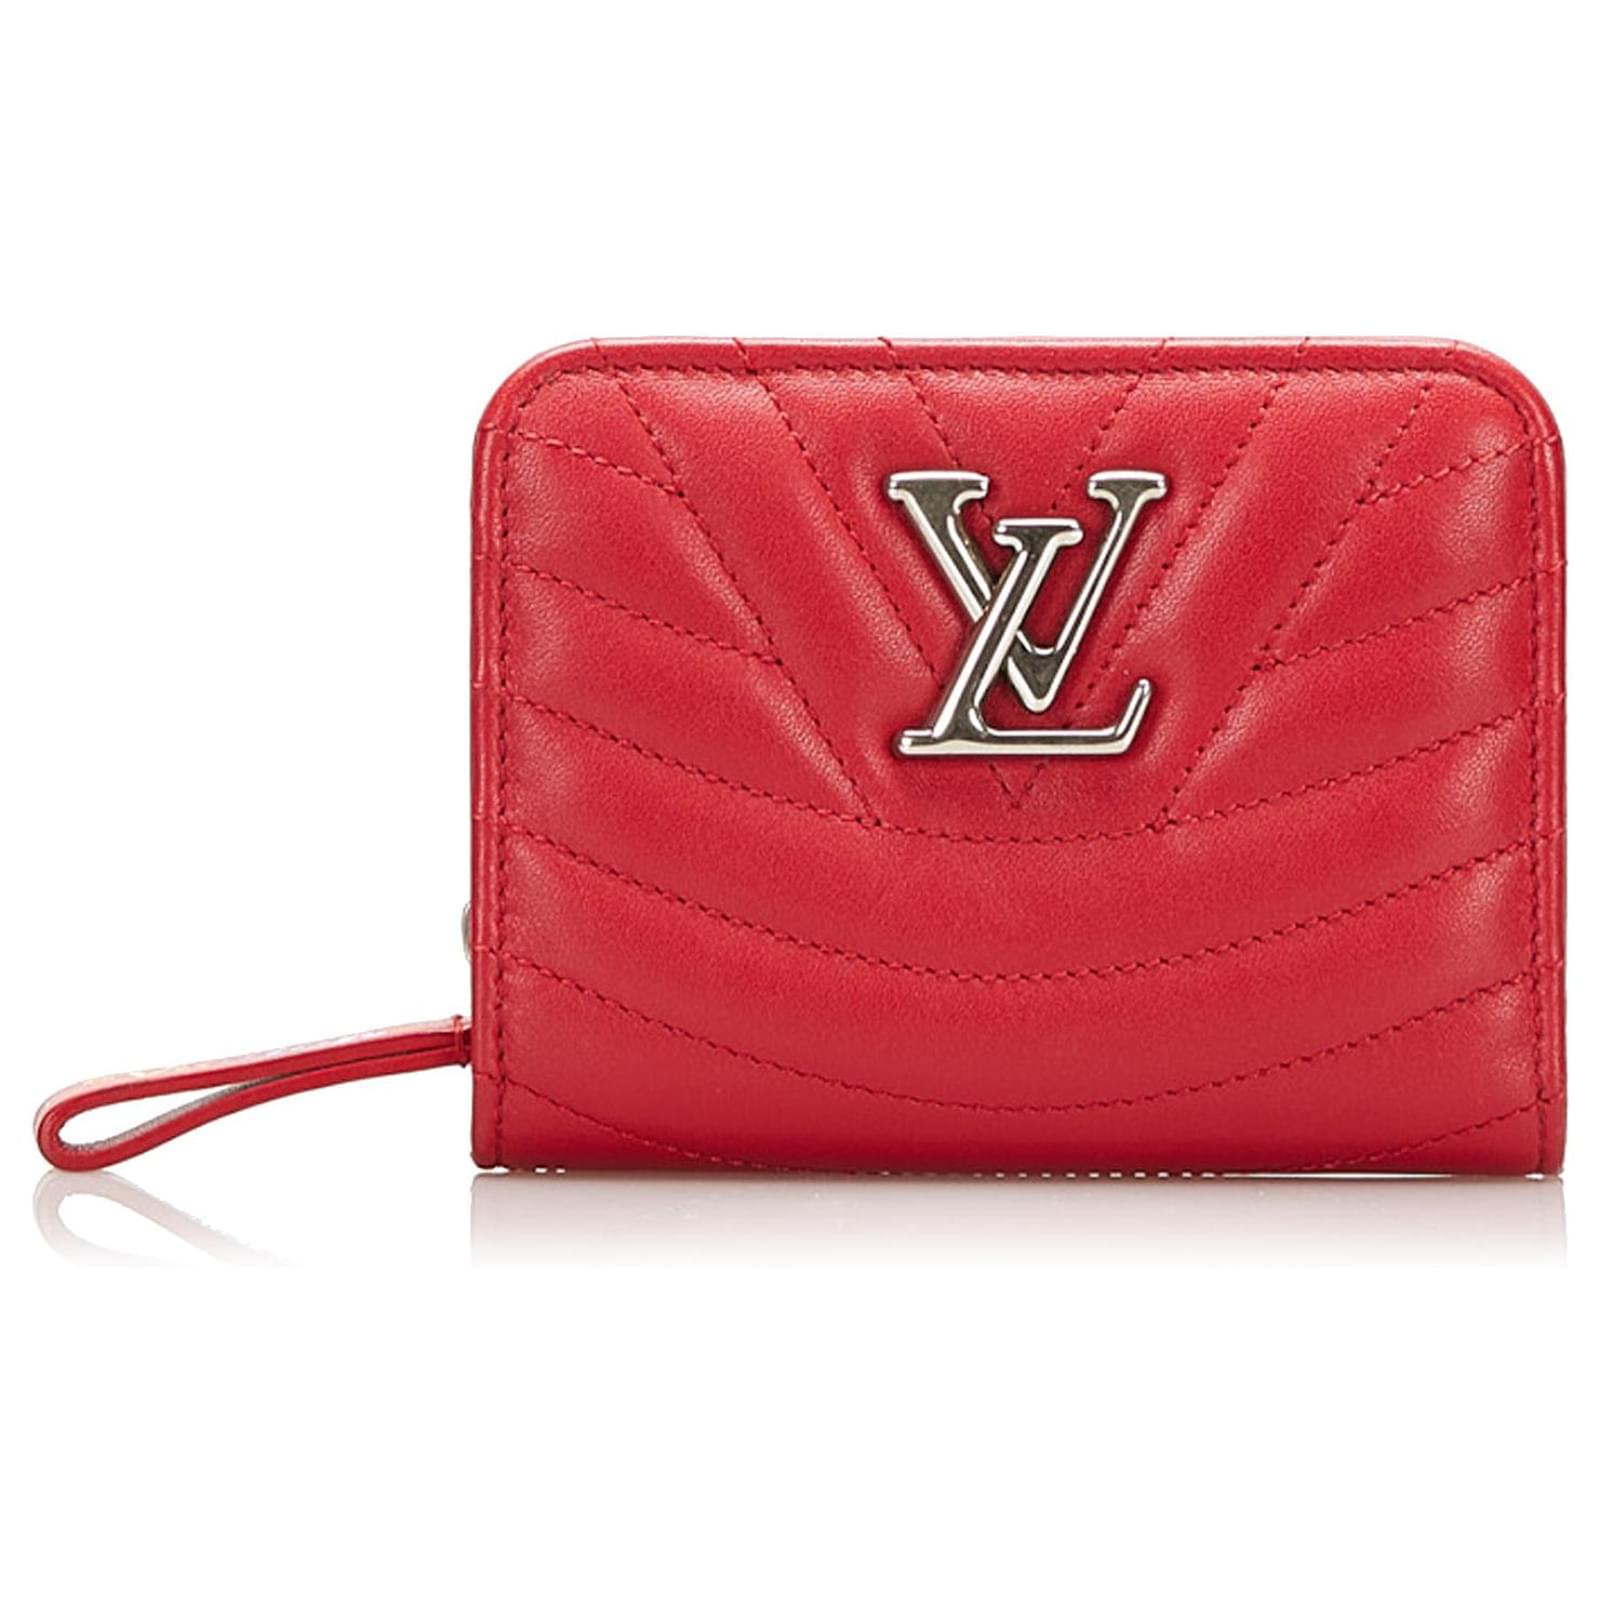 Louis Vuitton News and Features